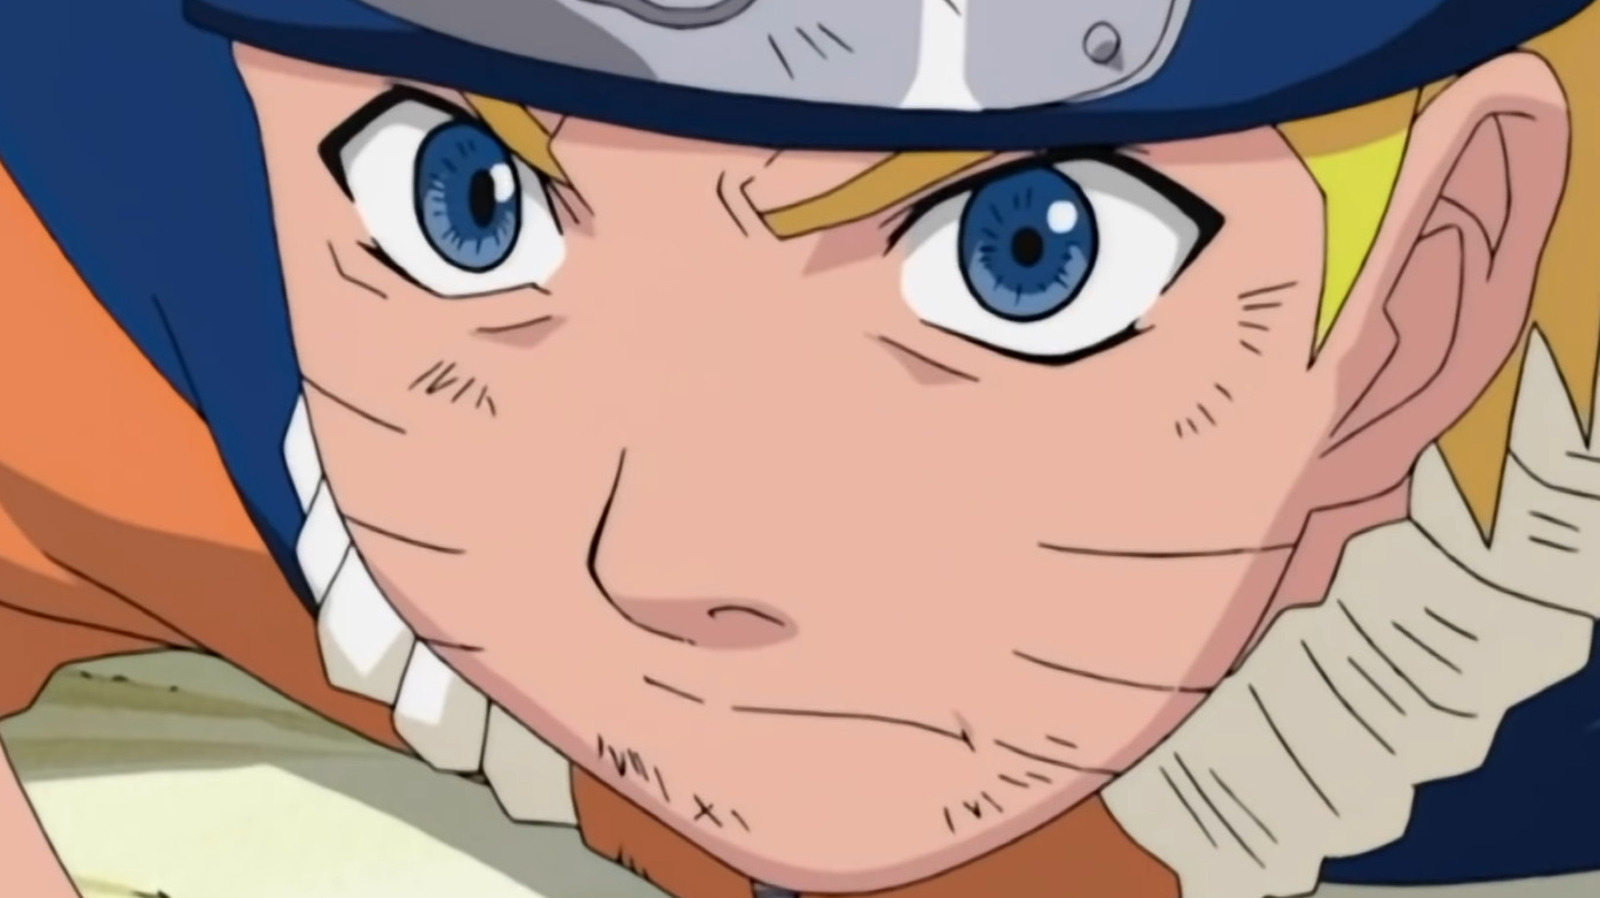 Fans Are Still Floored At One Of Naruto's Most Baffling Filler Episodes